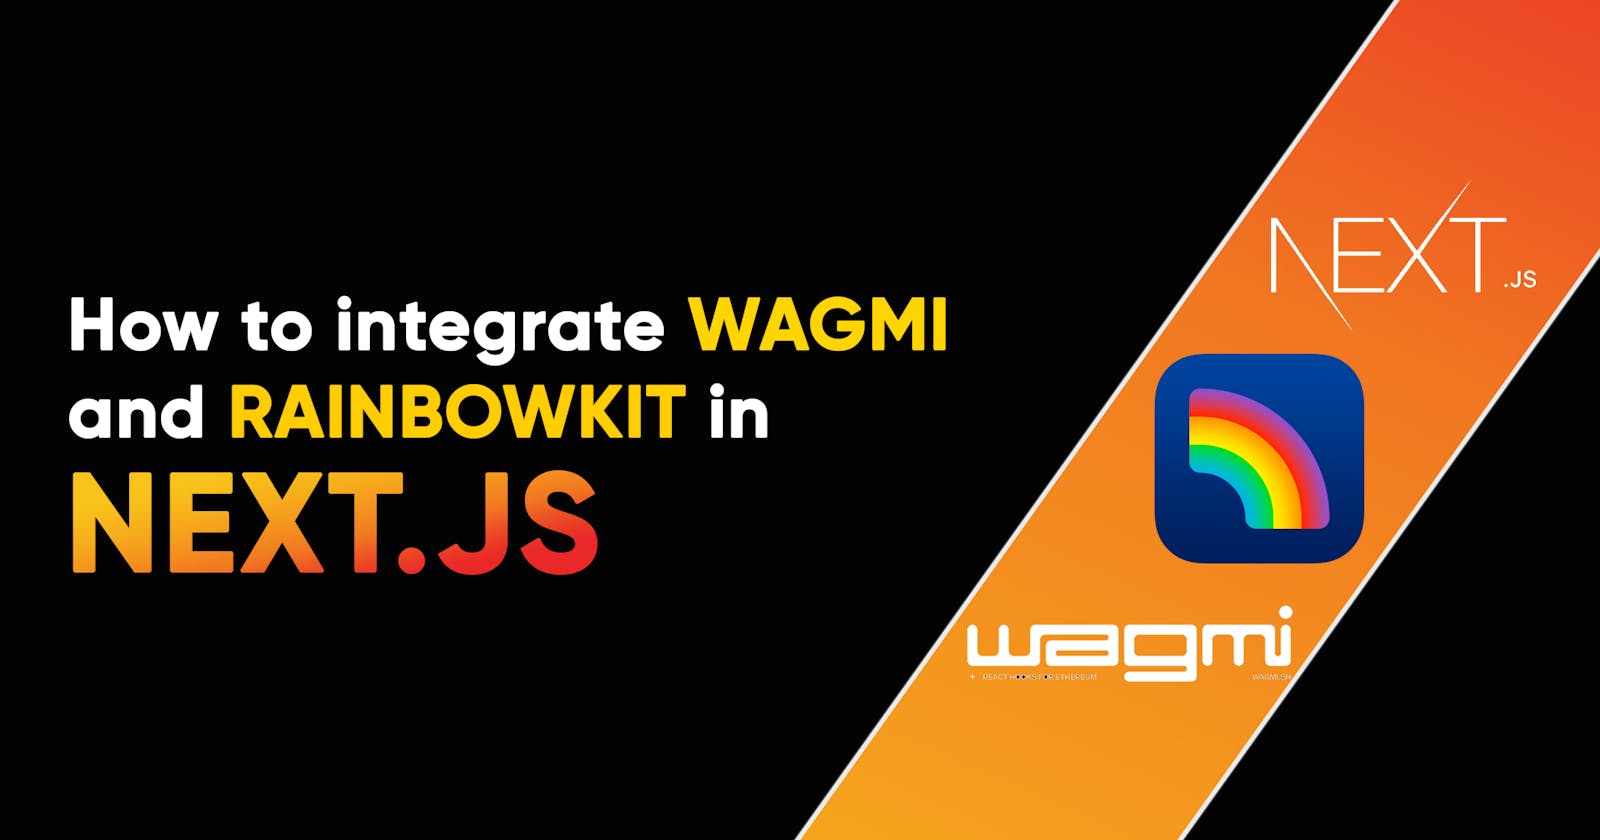 How to integrate RainbowKit and WAGMI in Next.js